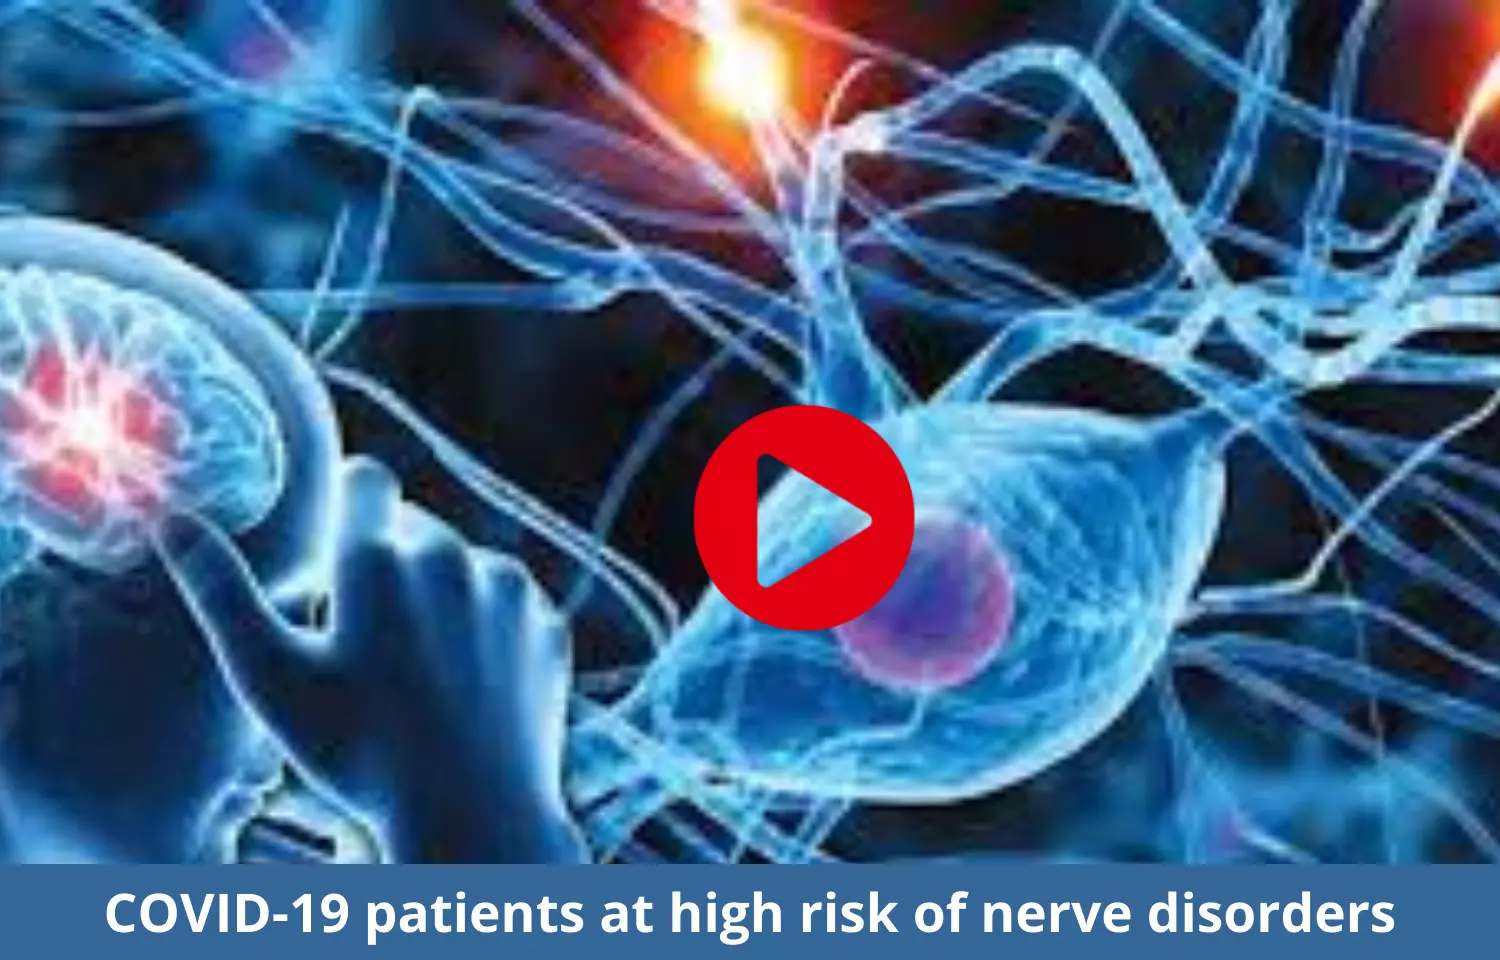 COVID-19 patients at high risk of nerve disorders